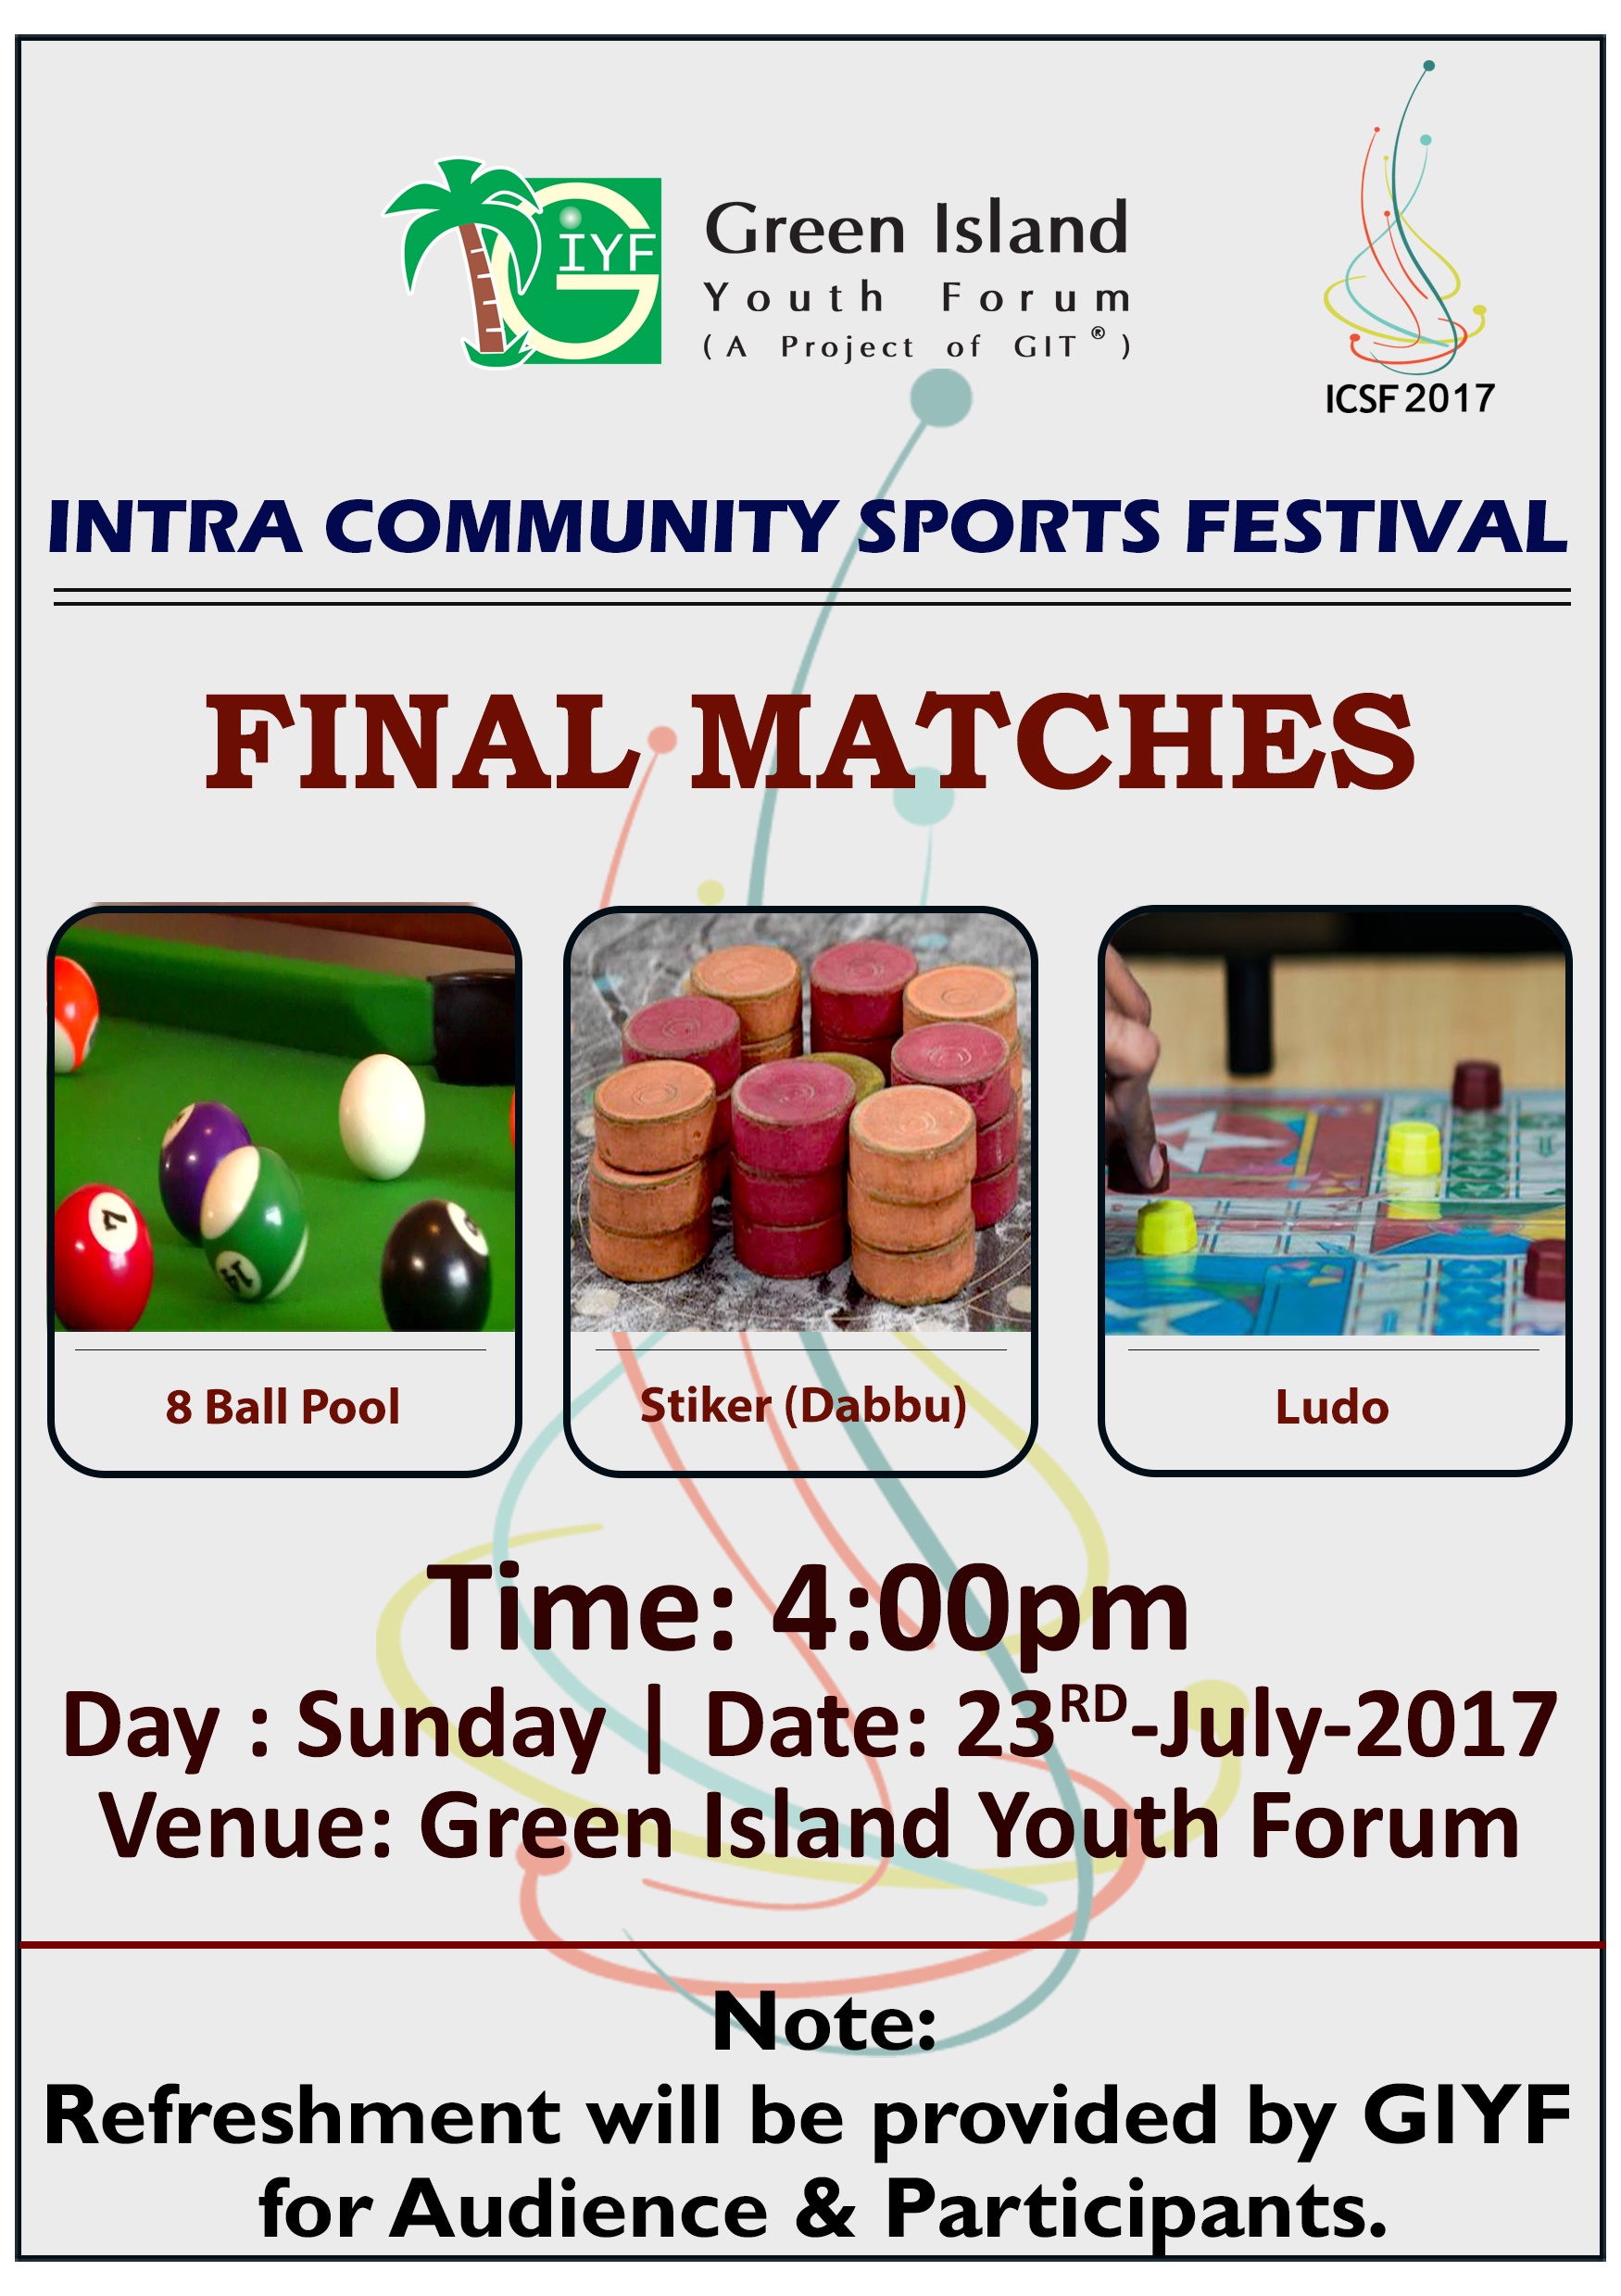 ICSF 2017 - Final Matches of Indoor Games